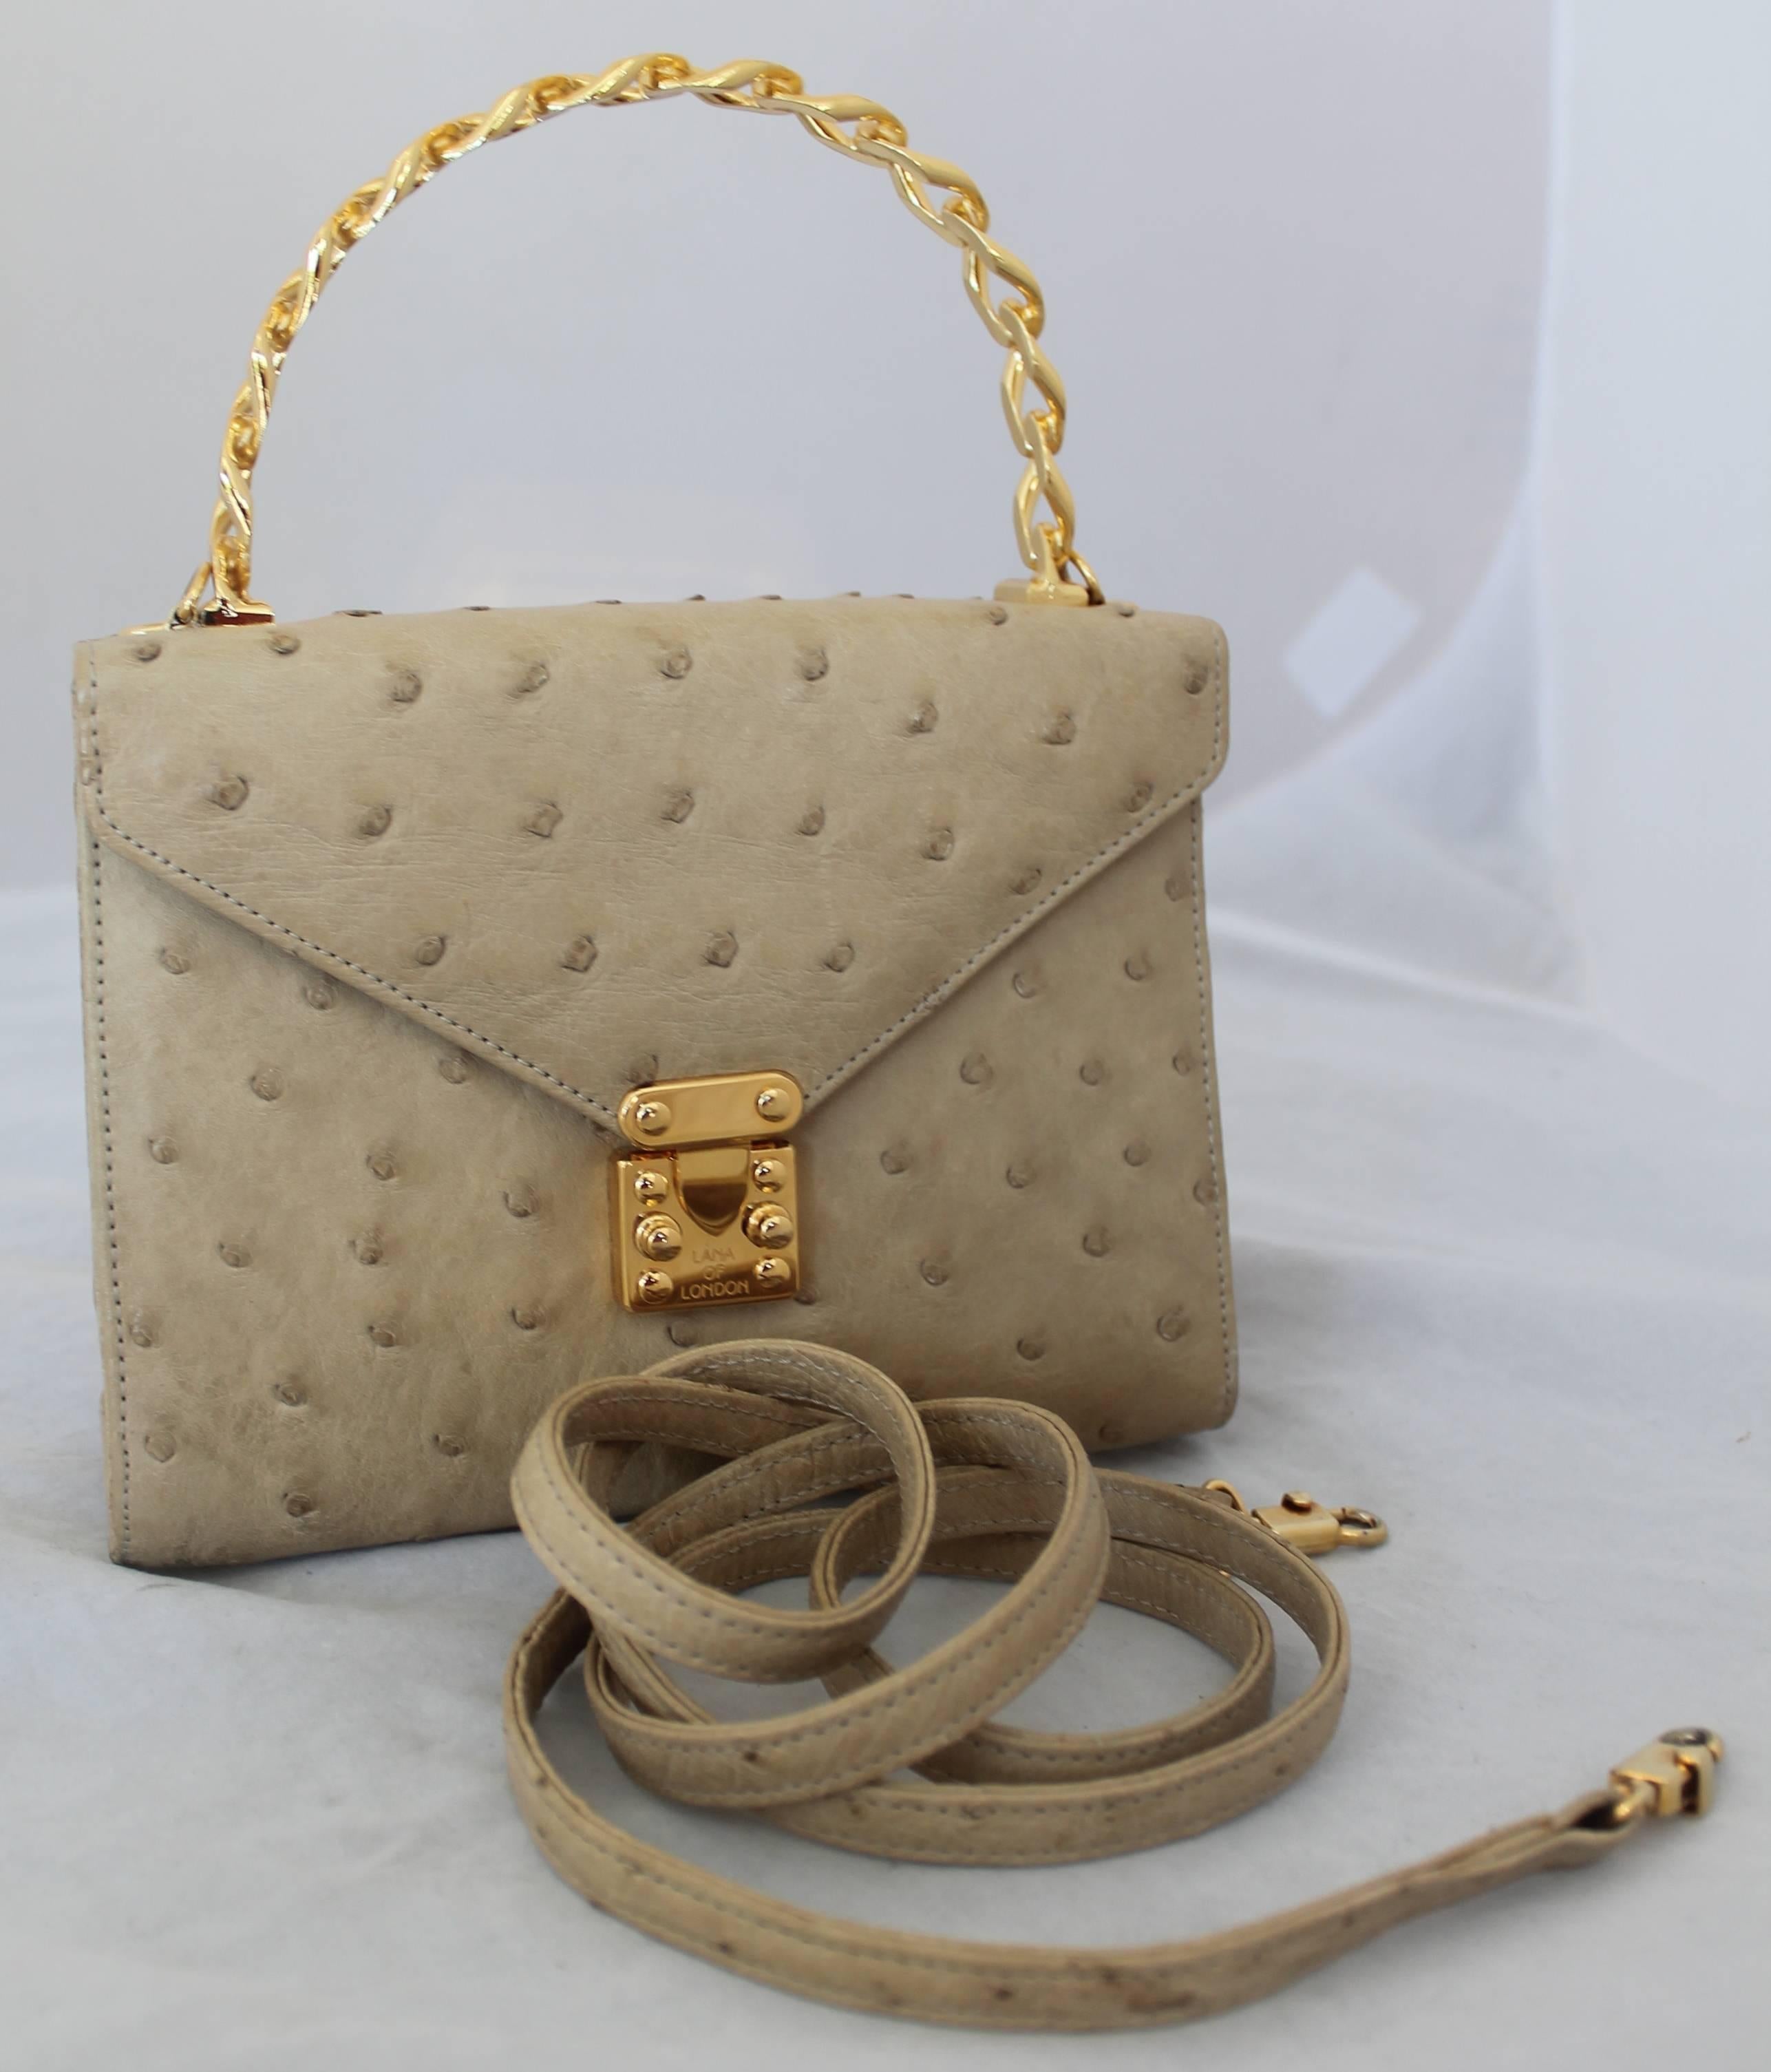 Lana Marks Vintage Beige Ostrich Small Top Handle Bag w/ Crossbody Strap - GHW.  This adorable vintage bag is in excellent condition.  It features a beautiful ostrich exterior, a gold chain link top handle, a mirror, and a crossbody